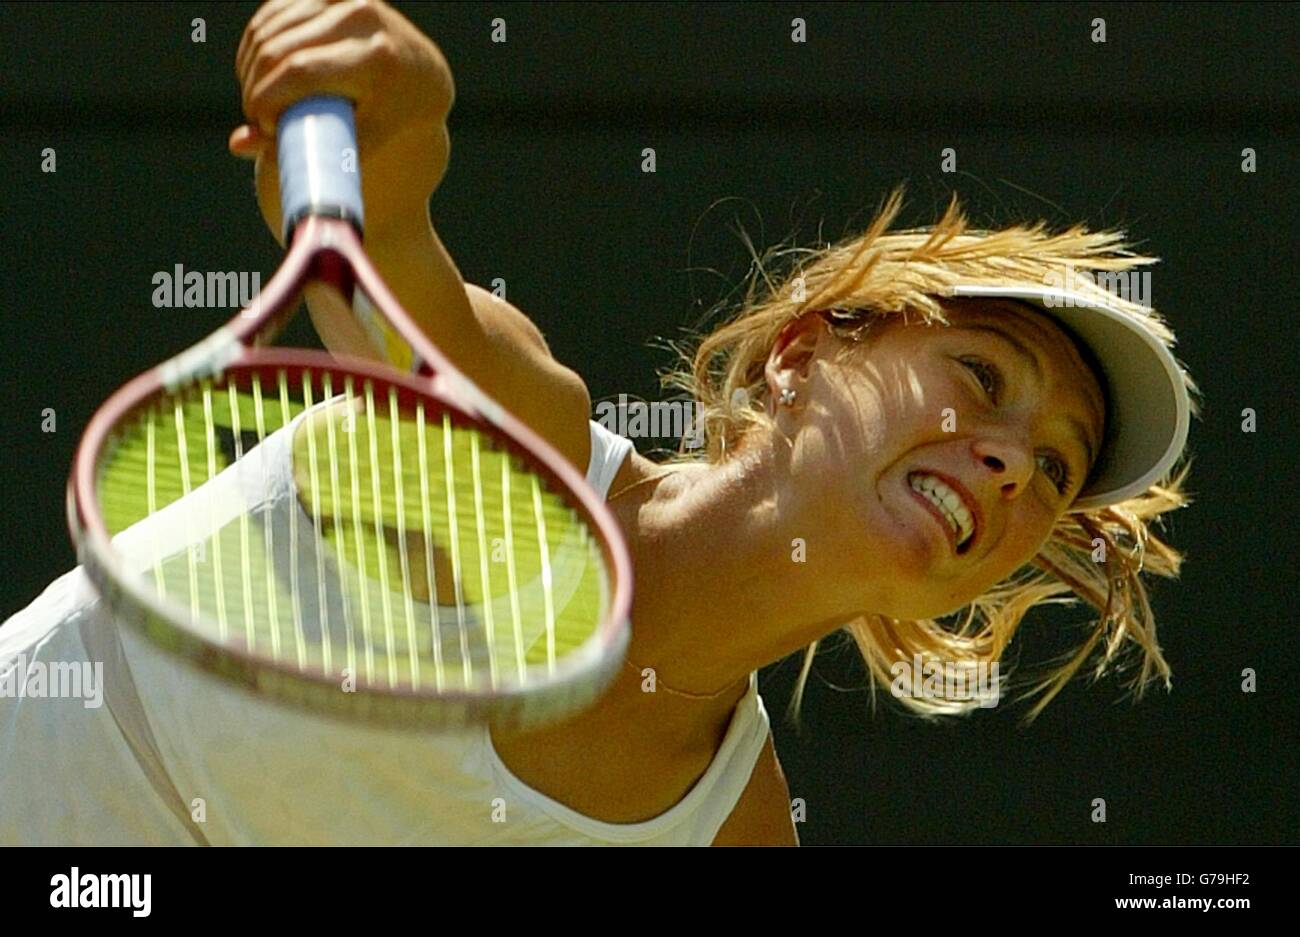 EDITORIAL USE ONLY, NO MOBILE PHONE USE Maria Sharapova from Russia in action against Jelena Dokic from Serbia Montenegro in the third round at the All England Lawn Tennis Championships at Wimbledon. Stock Photo